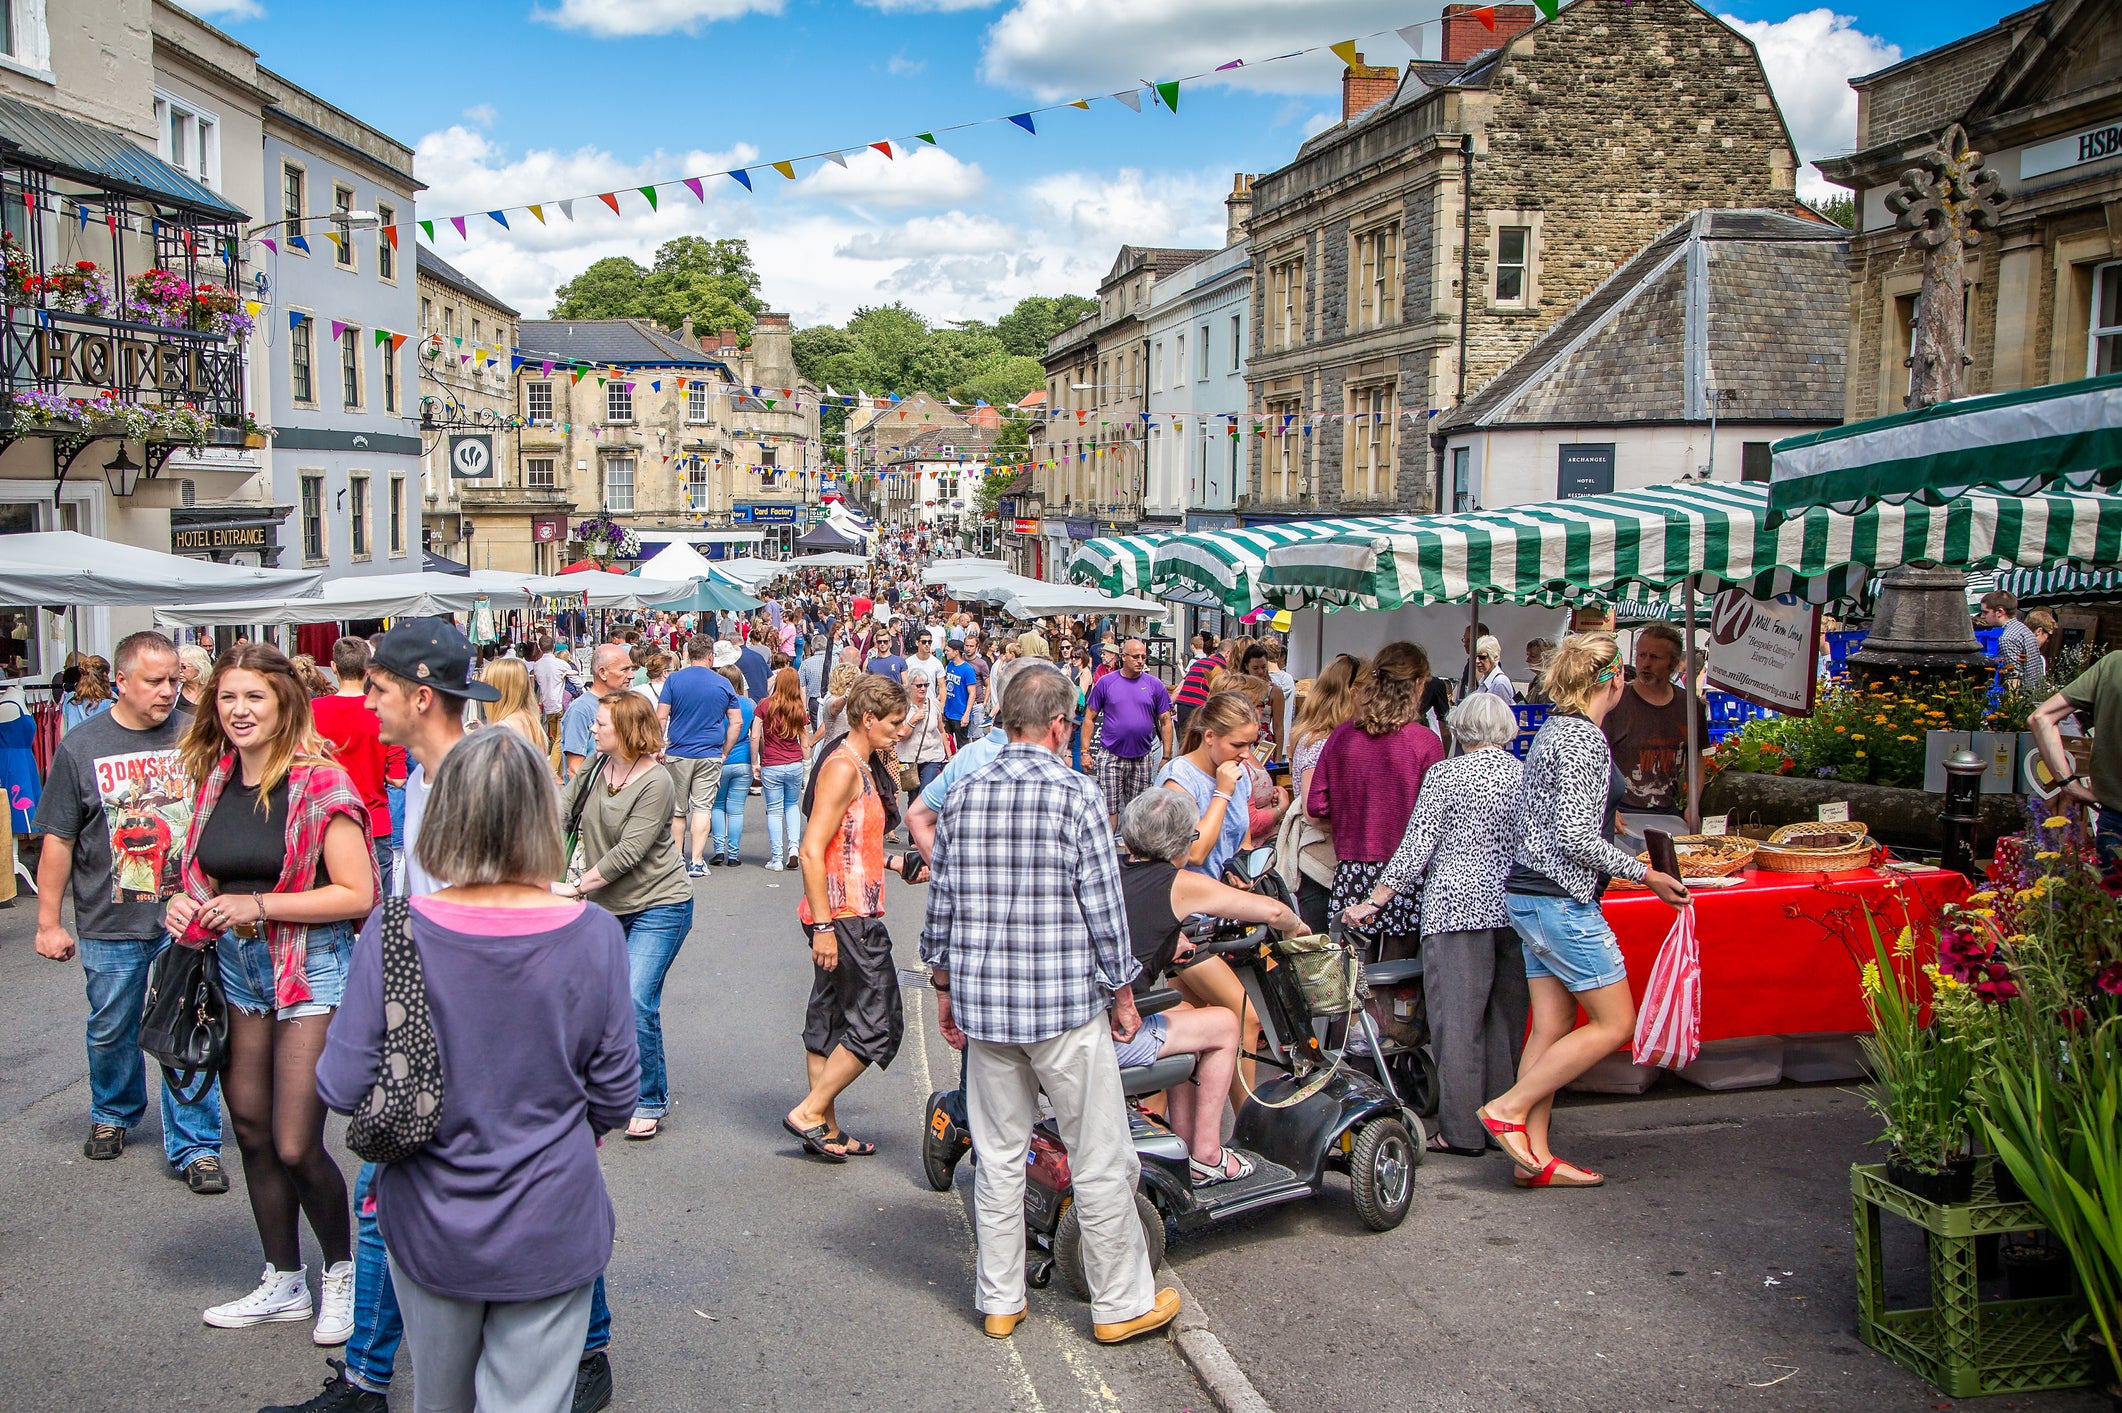 Frome locals are struggling to find homes to rent in the bustling town